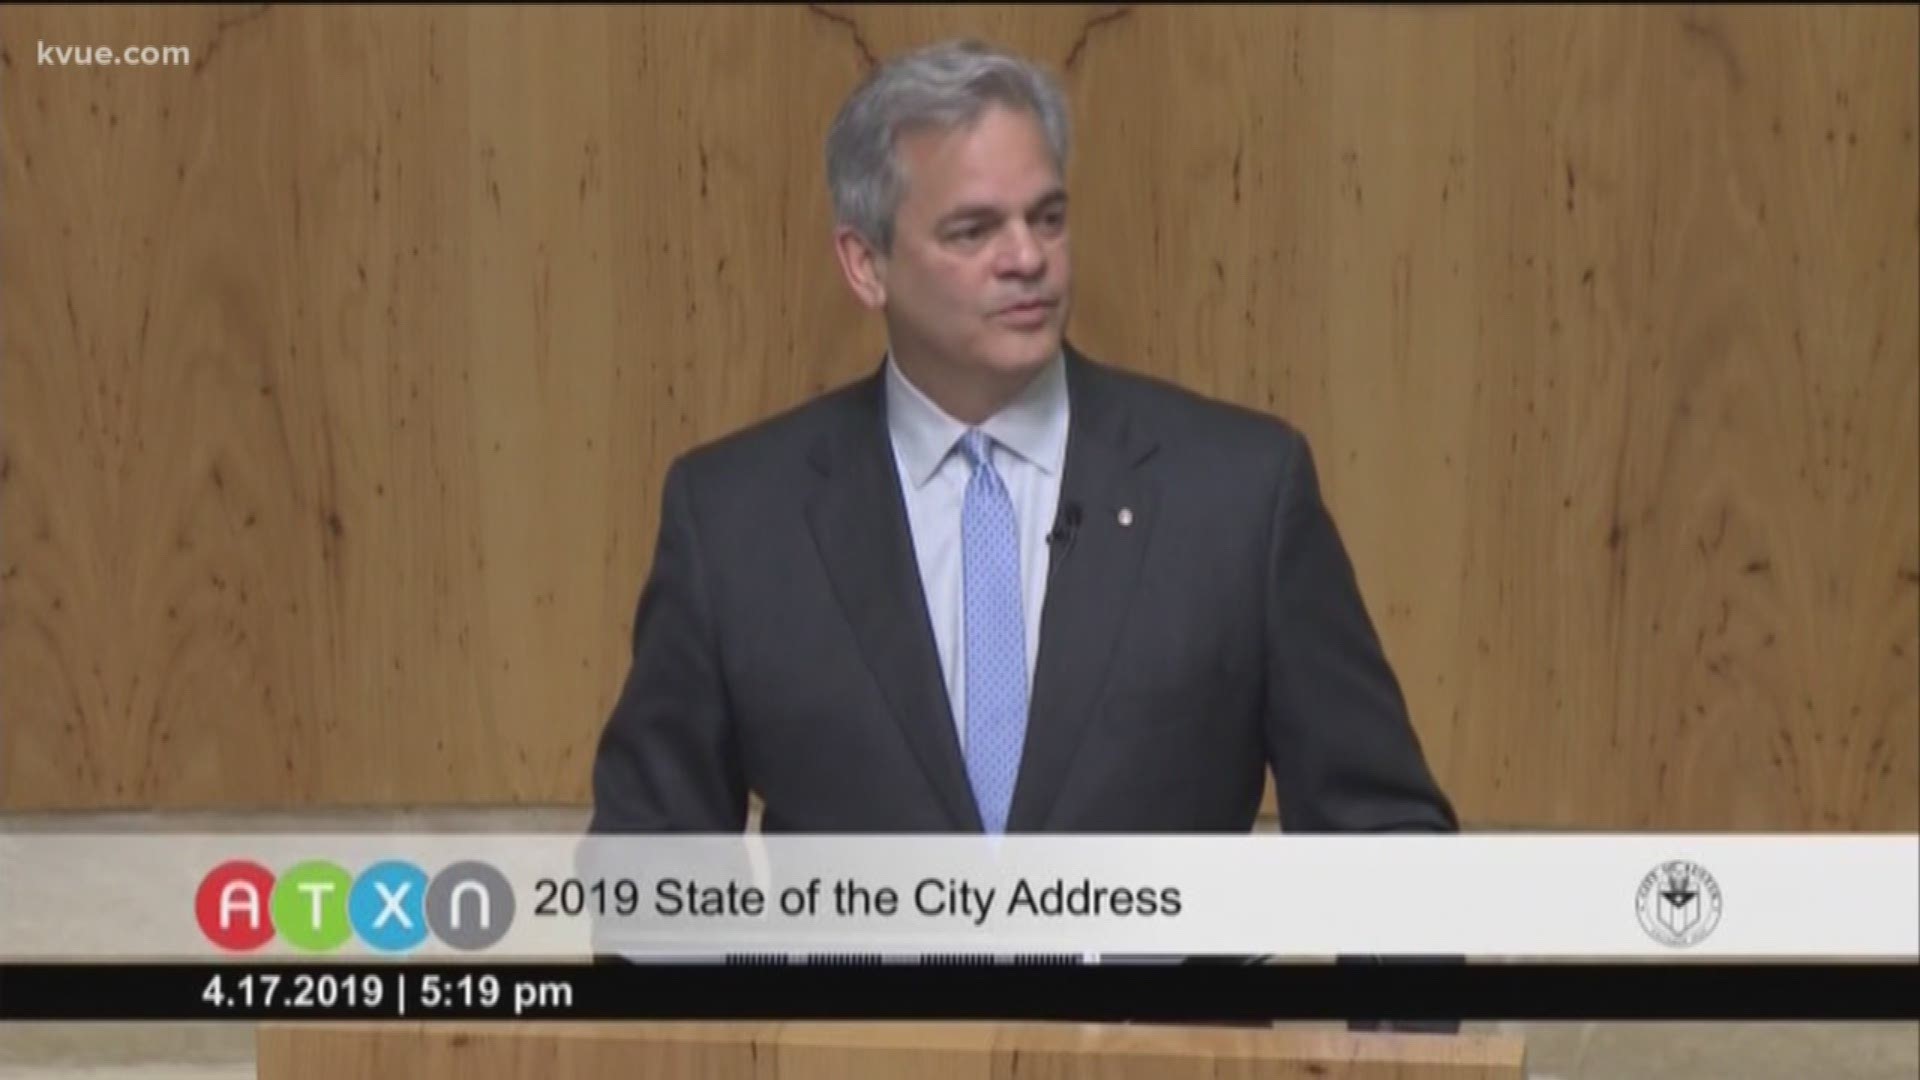 Austin Mayor Steve Adler spoke about some of the city's problems – including transportation and housing – in his "State of the City" address Wednesday.